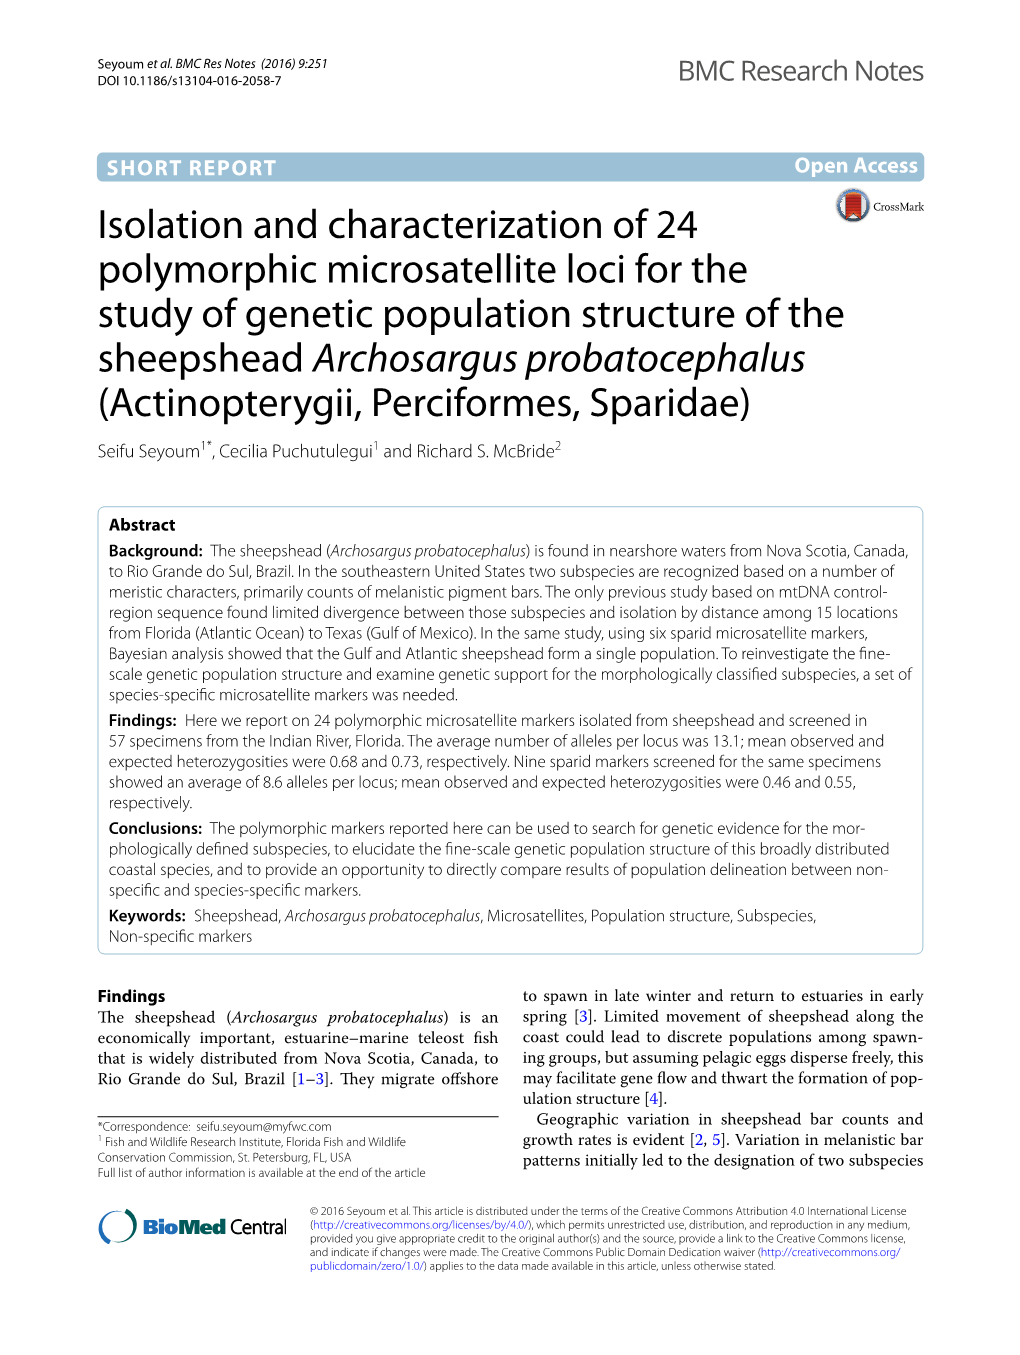 Isolation and Characterization of 24 Polymorphic Microsatellite Loci for the Study of Genetic Population Structure of the Sheeps